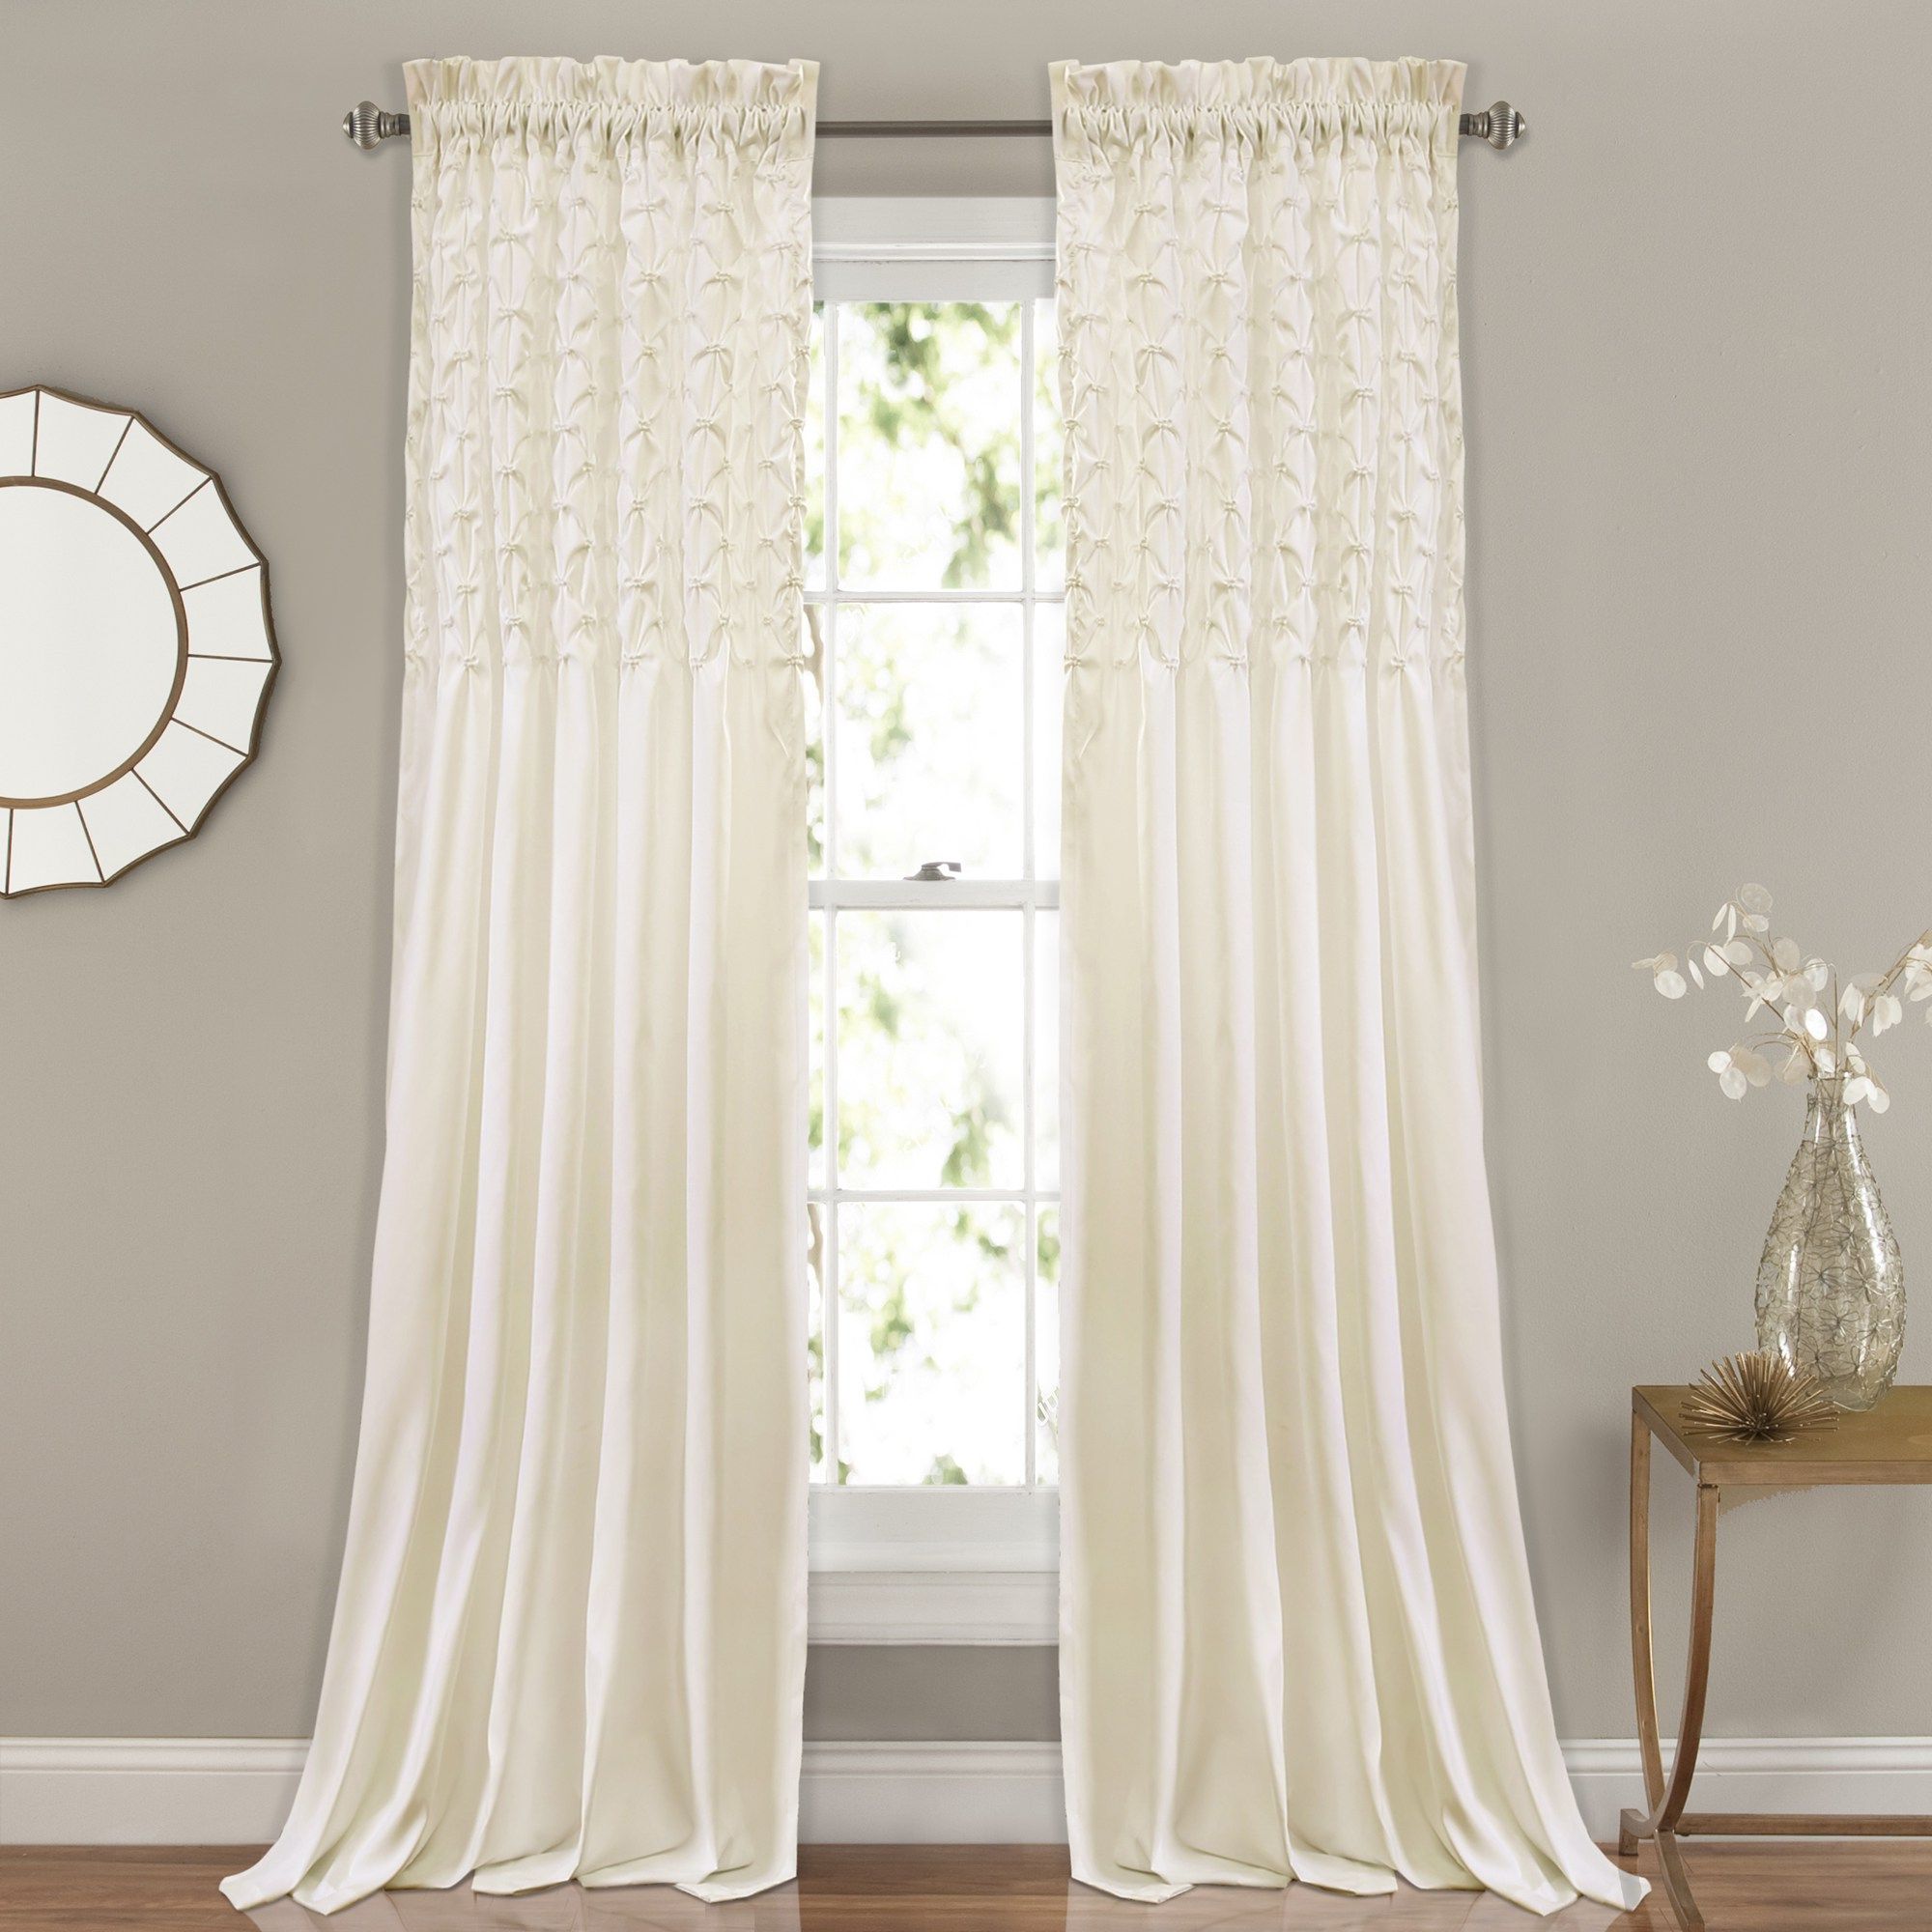 Widely Used The Gray Barn Gila Curtain Panel Pairs Inside The Gray Barn Sunset Hollow Window Curtain Panel Pair (View 8 of 20)